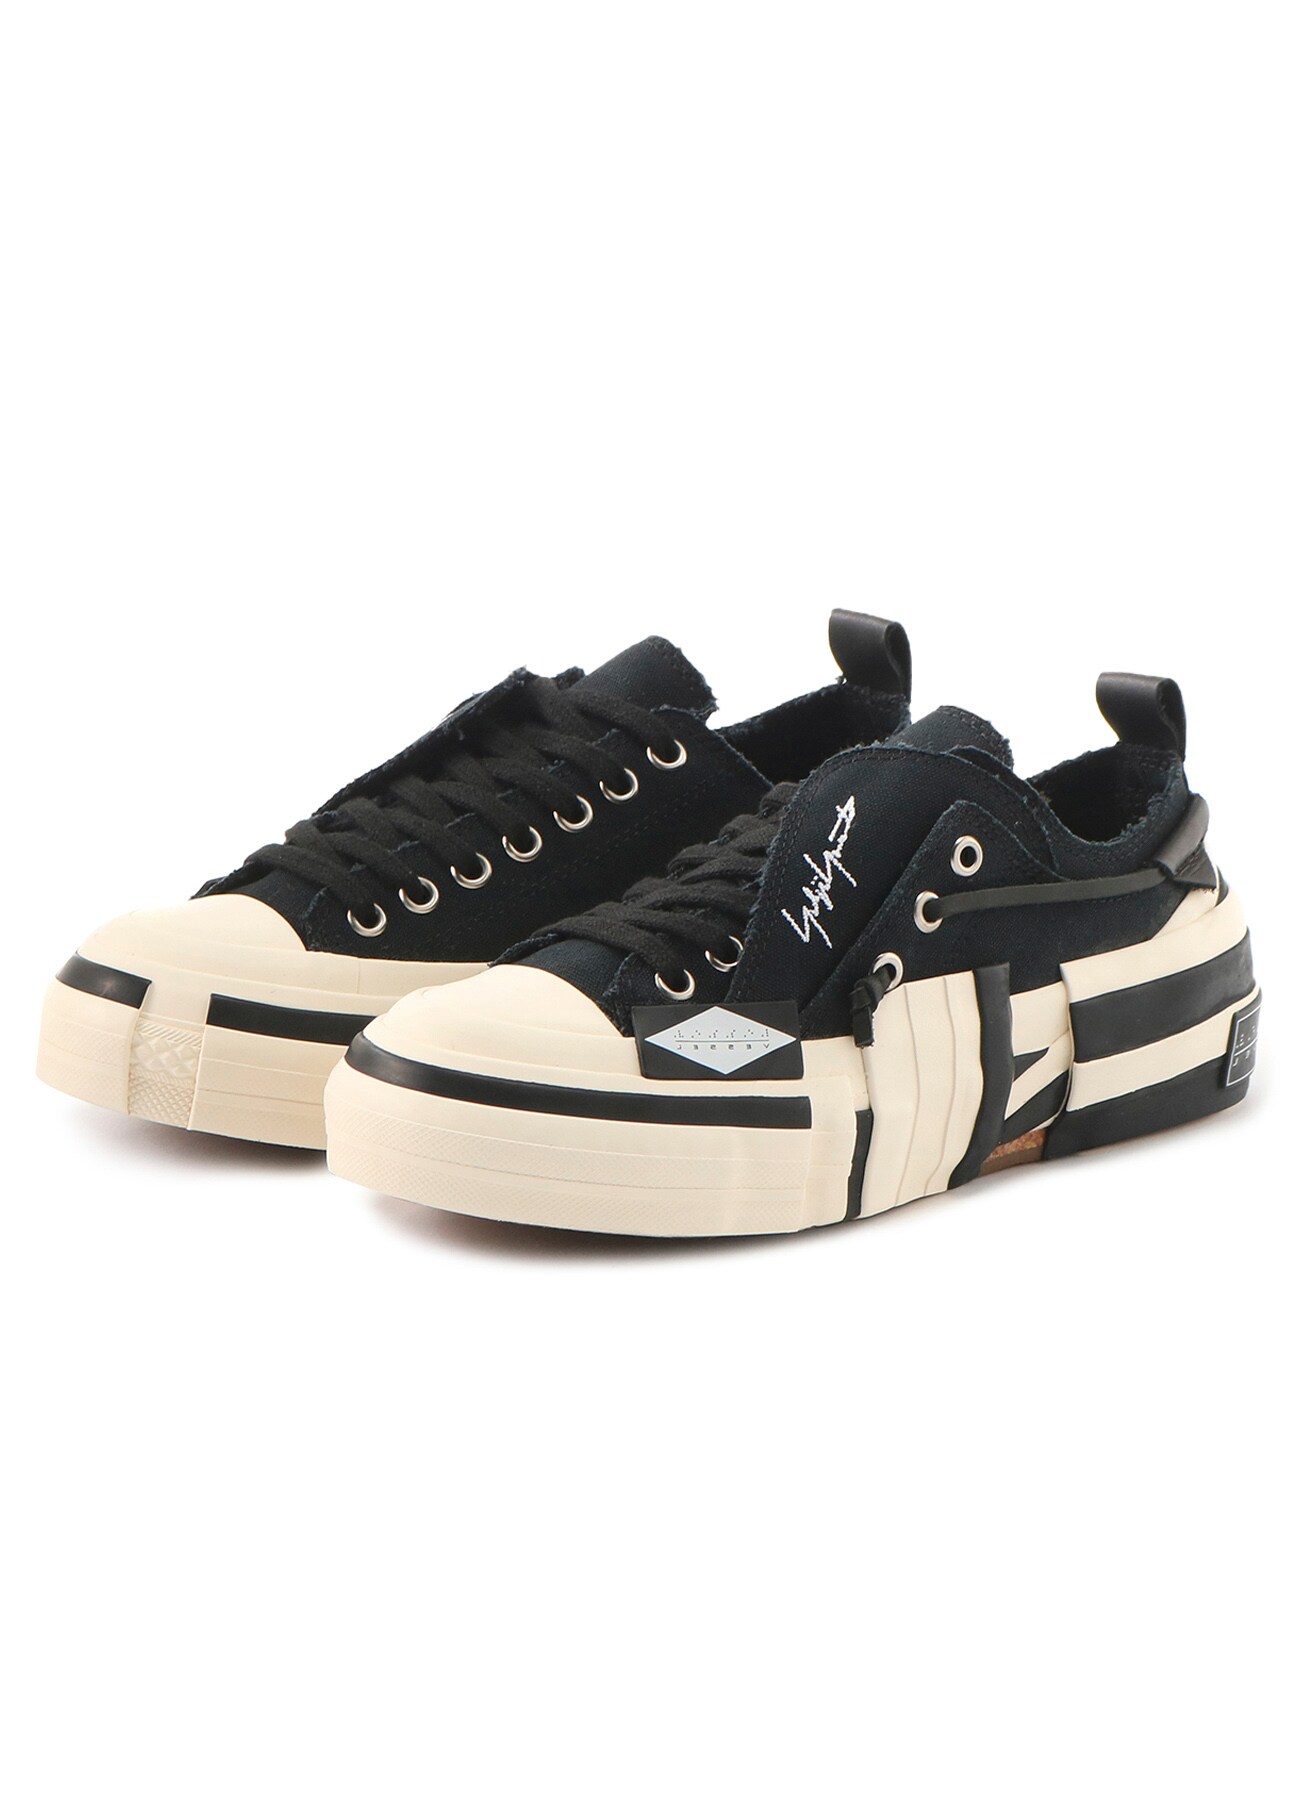 C / CANVAS BK LAYERED LOW TOP SNEAKERS 